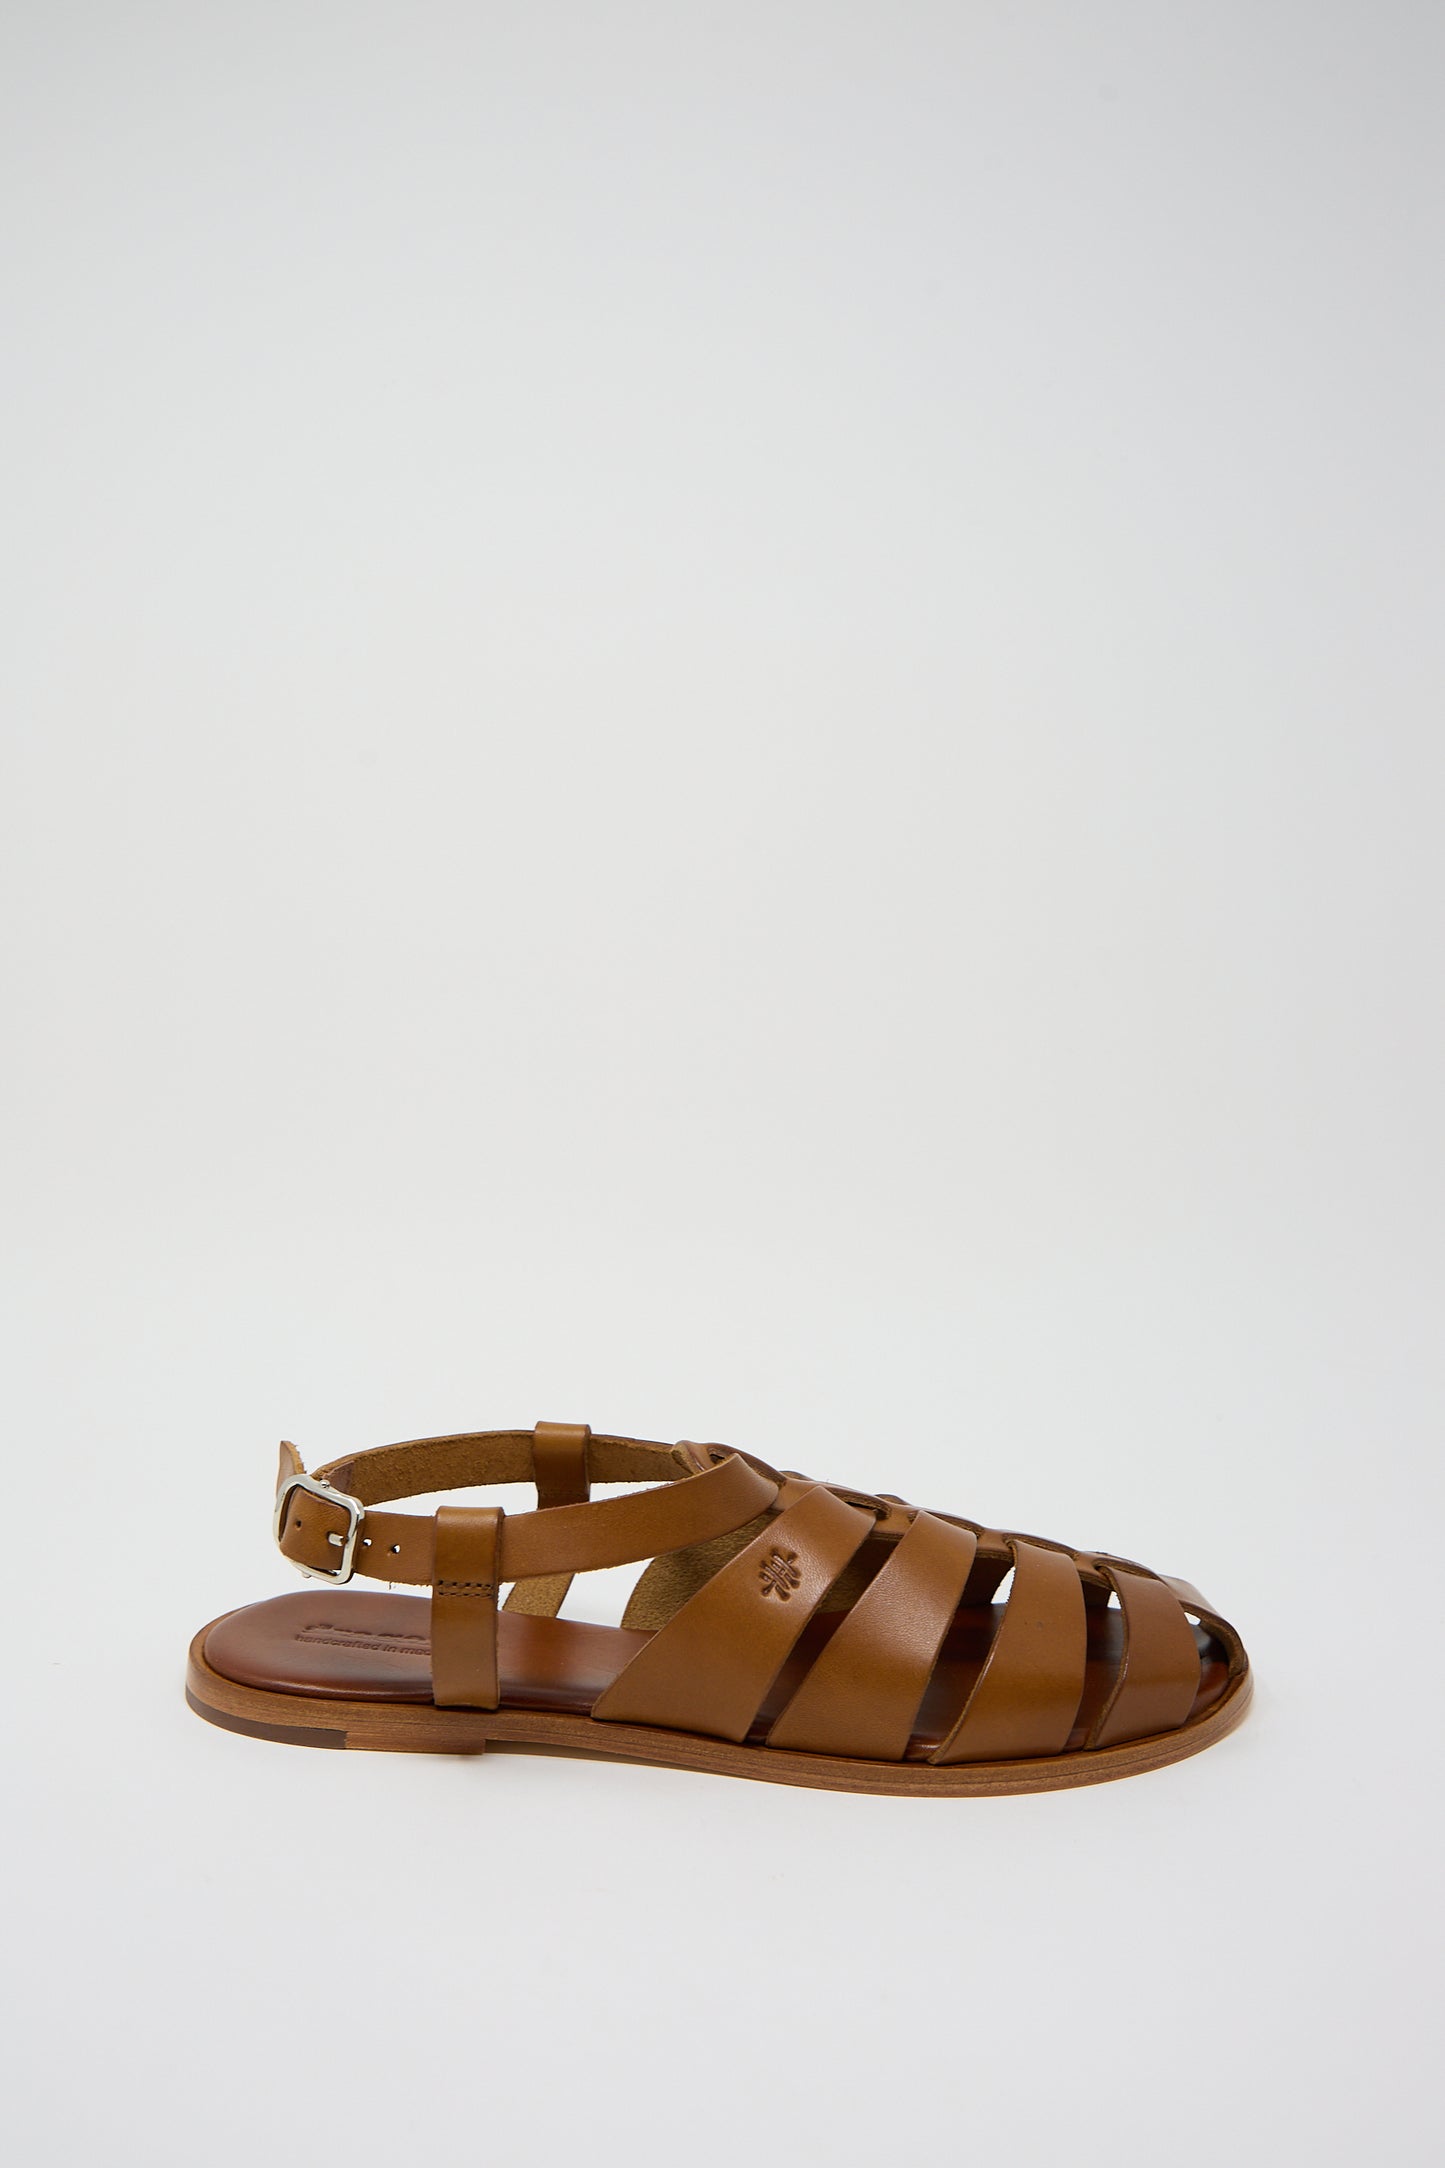 A single brown woven leather Pescador sandal by Dragon Diffusion shown against a plain off-white background.